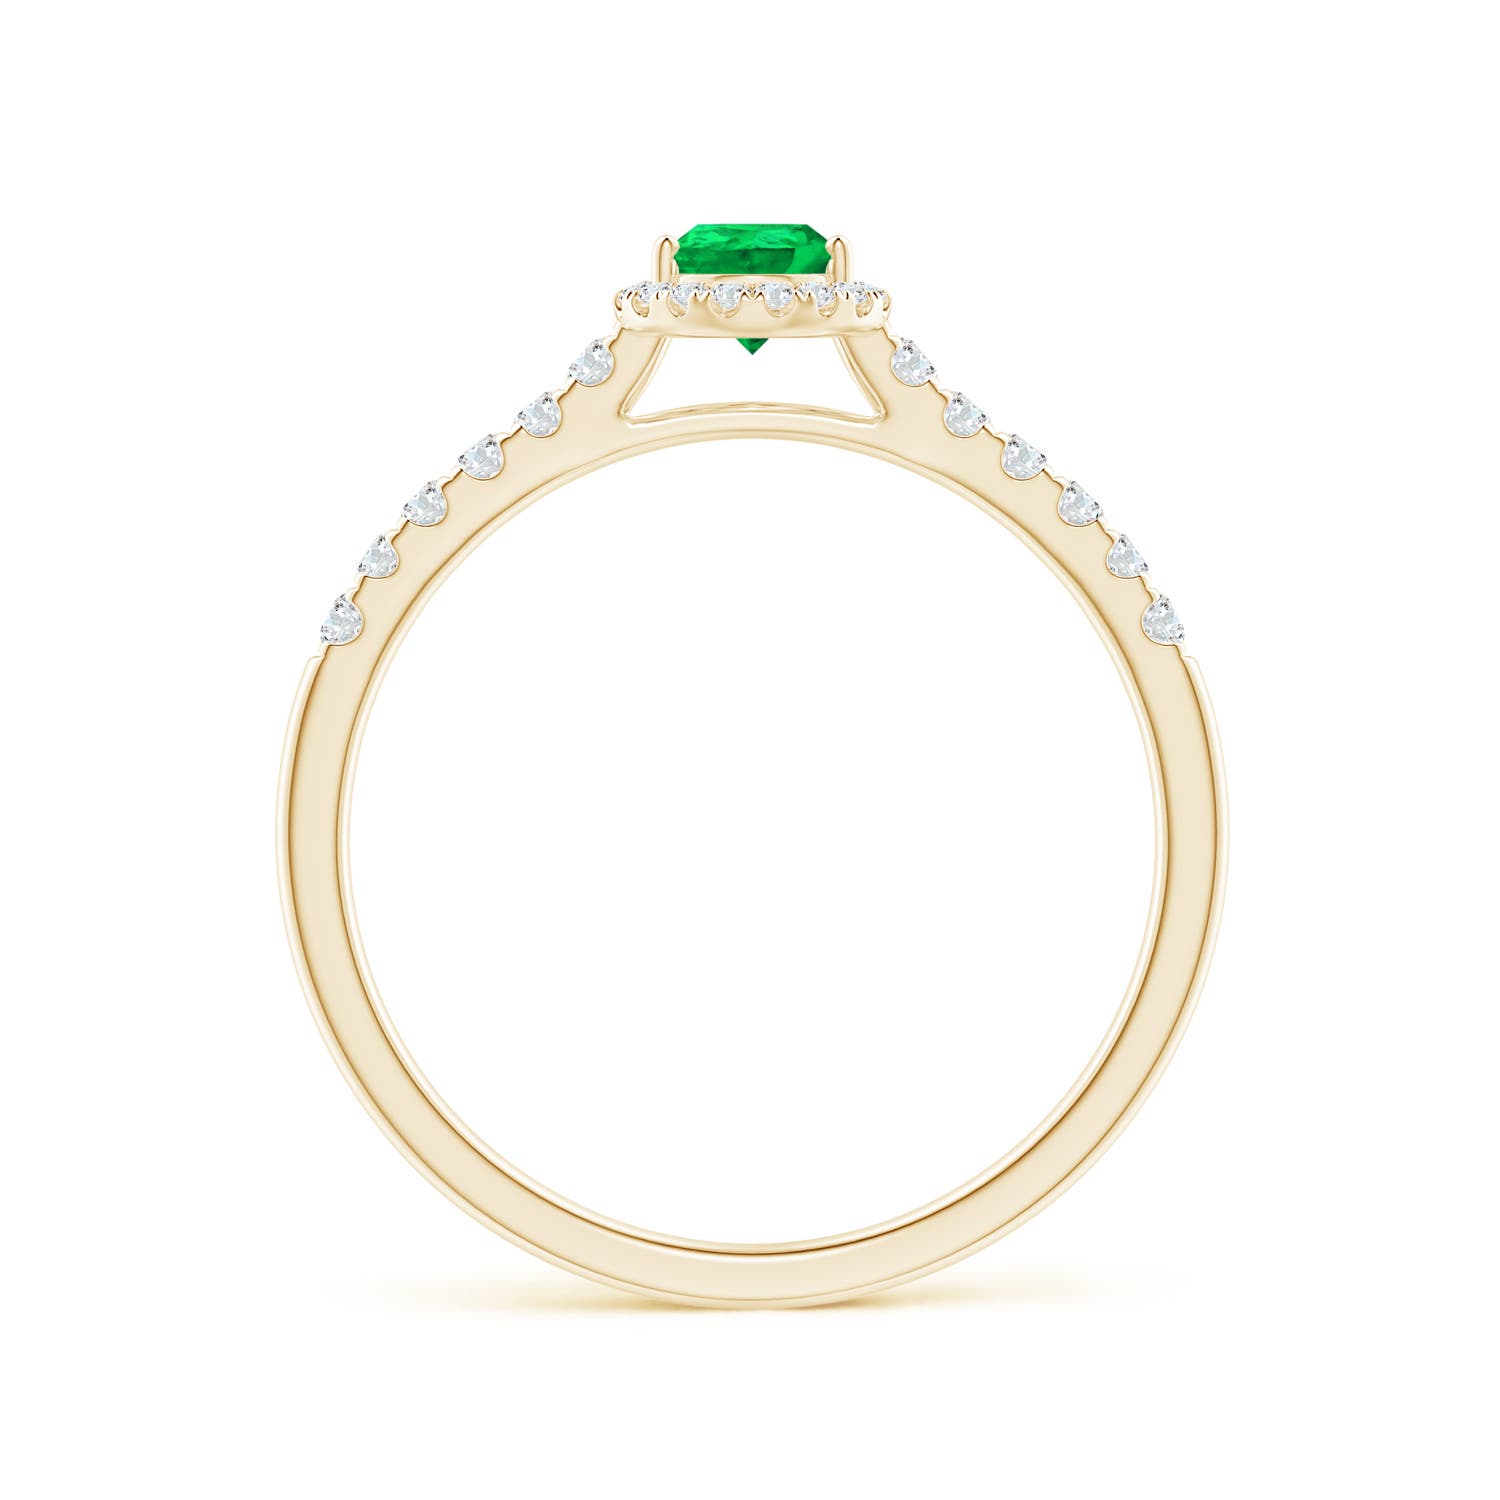 AAA - Emerald / 0.56 CT / 14 KT Yellow Gold